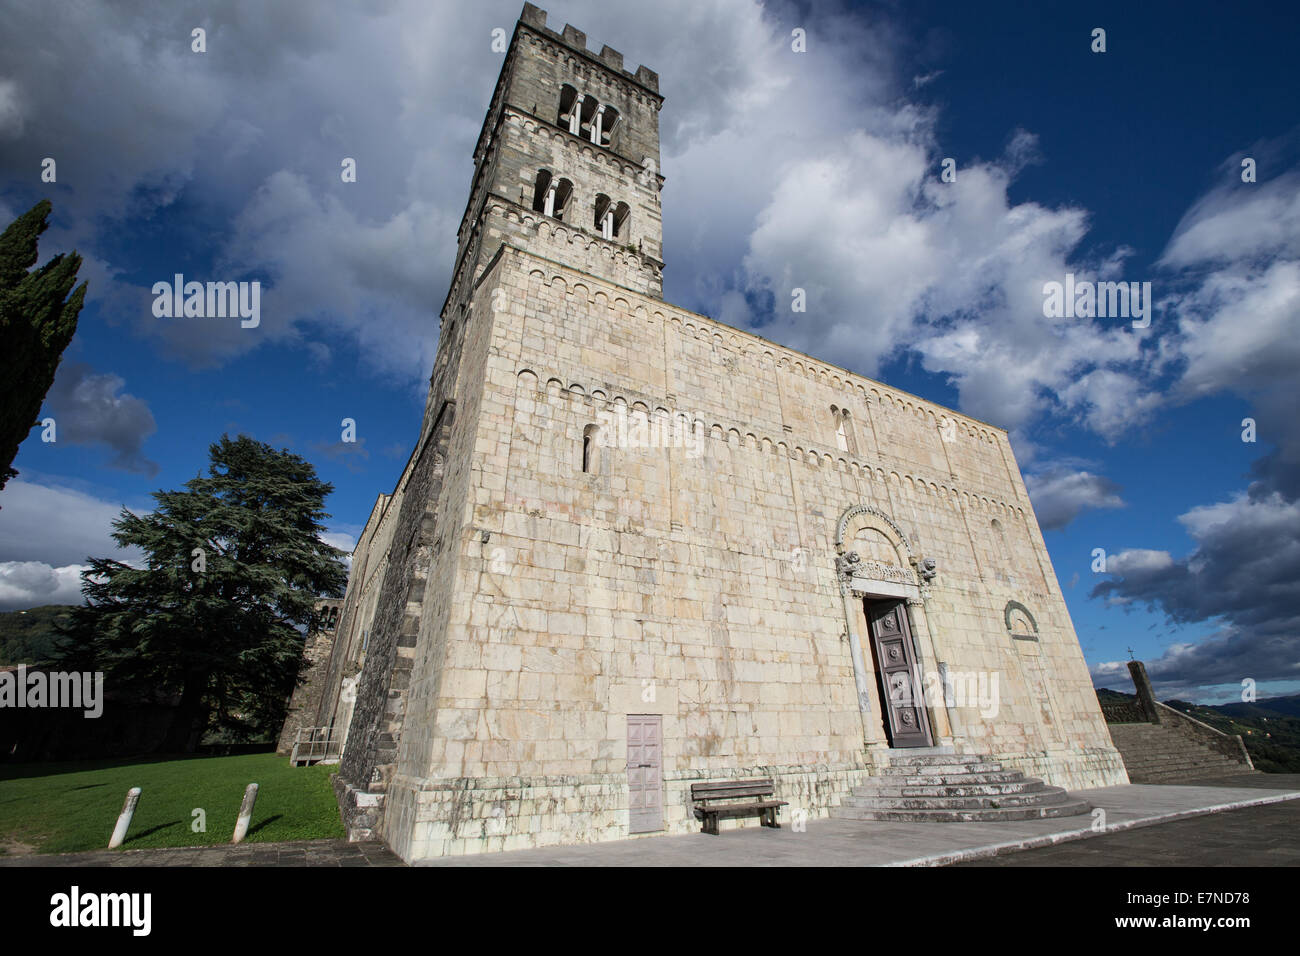 Duomo, Cathedral, Barga, Tuscany, Italy, sightseeing, place of interest, worship, medieval town, holiday, weekend retreat, Stock Photo